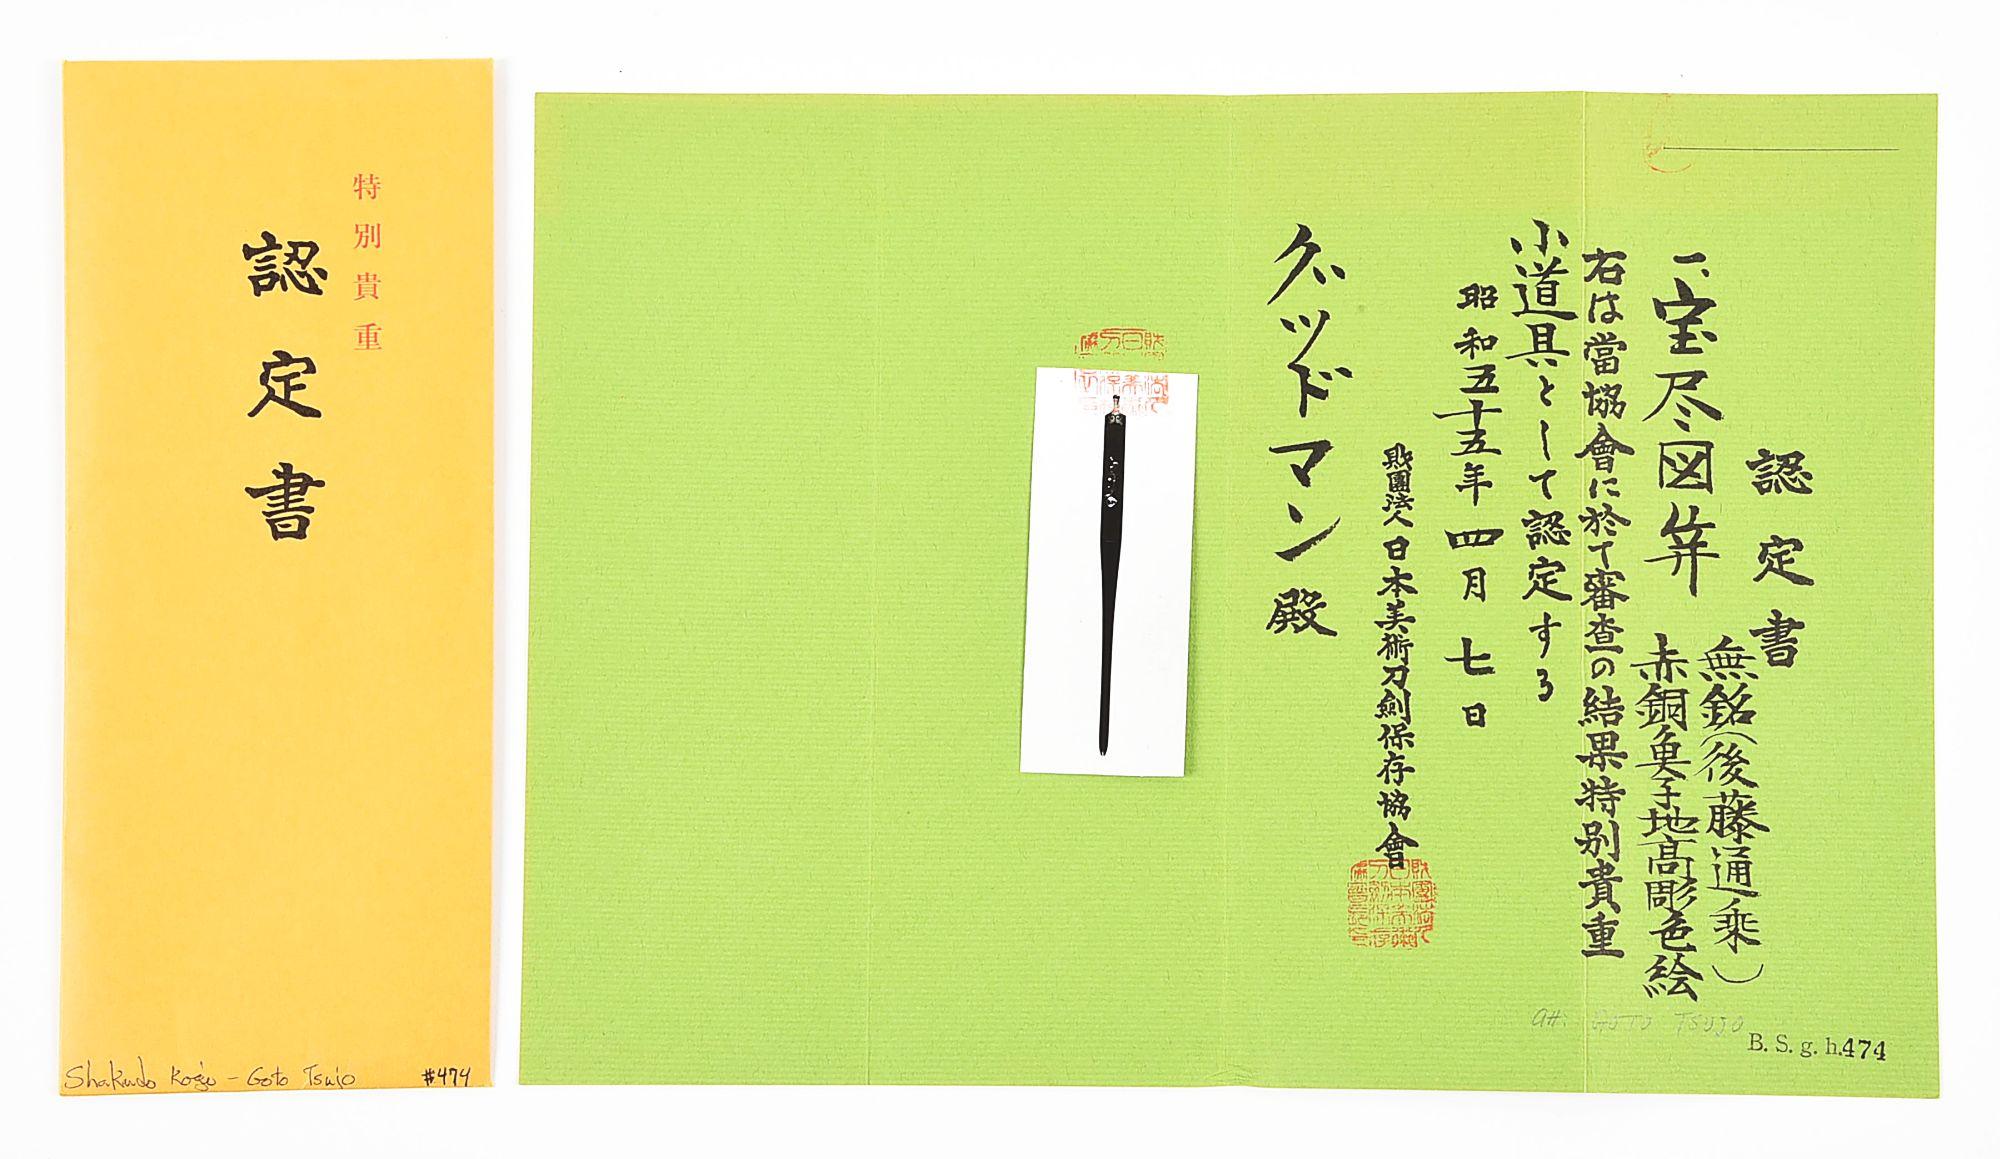 A MUMEI KOGAI WITH TOKUBETSU KICHO PAPERS TO GOTO TSUJO, DEPICTING A BAG OF MONEY AND GOURDS.